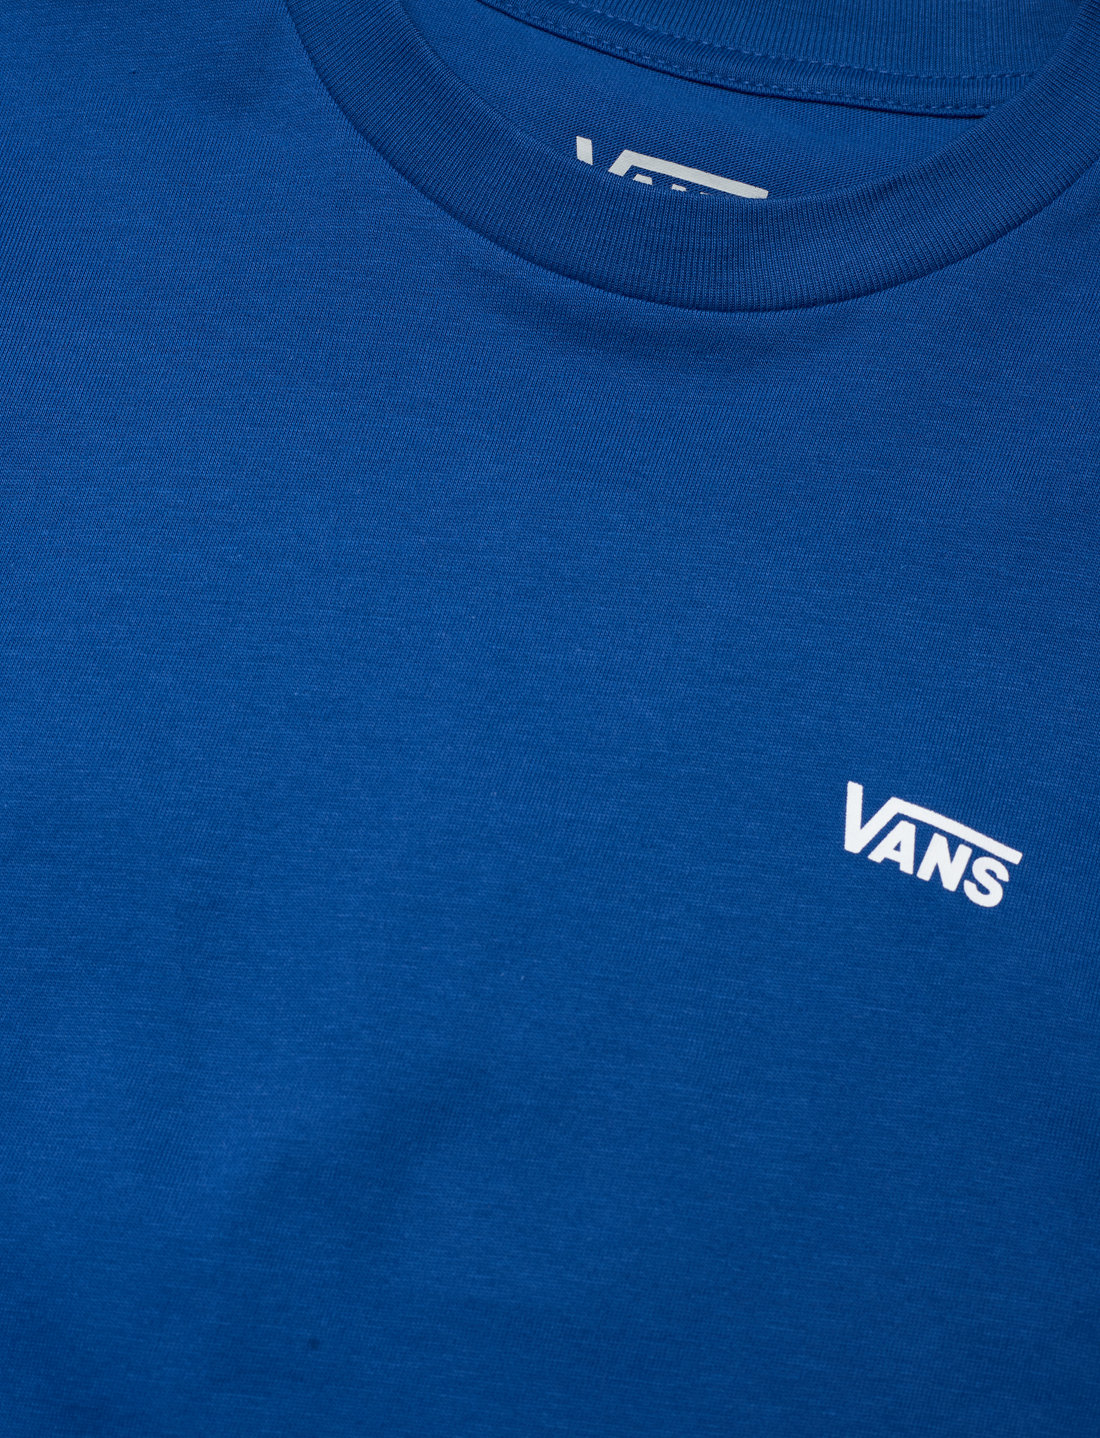 VANS By Left Chest Tee Boys - T-Shirts